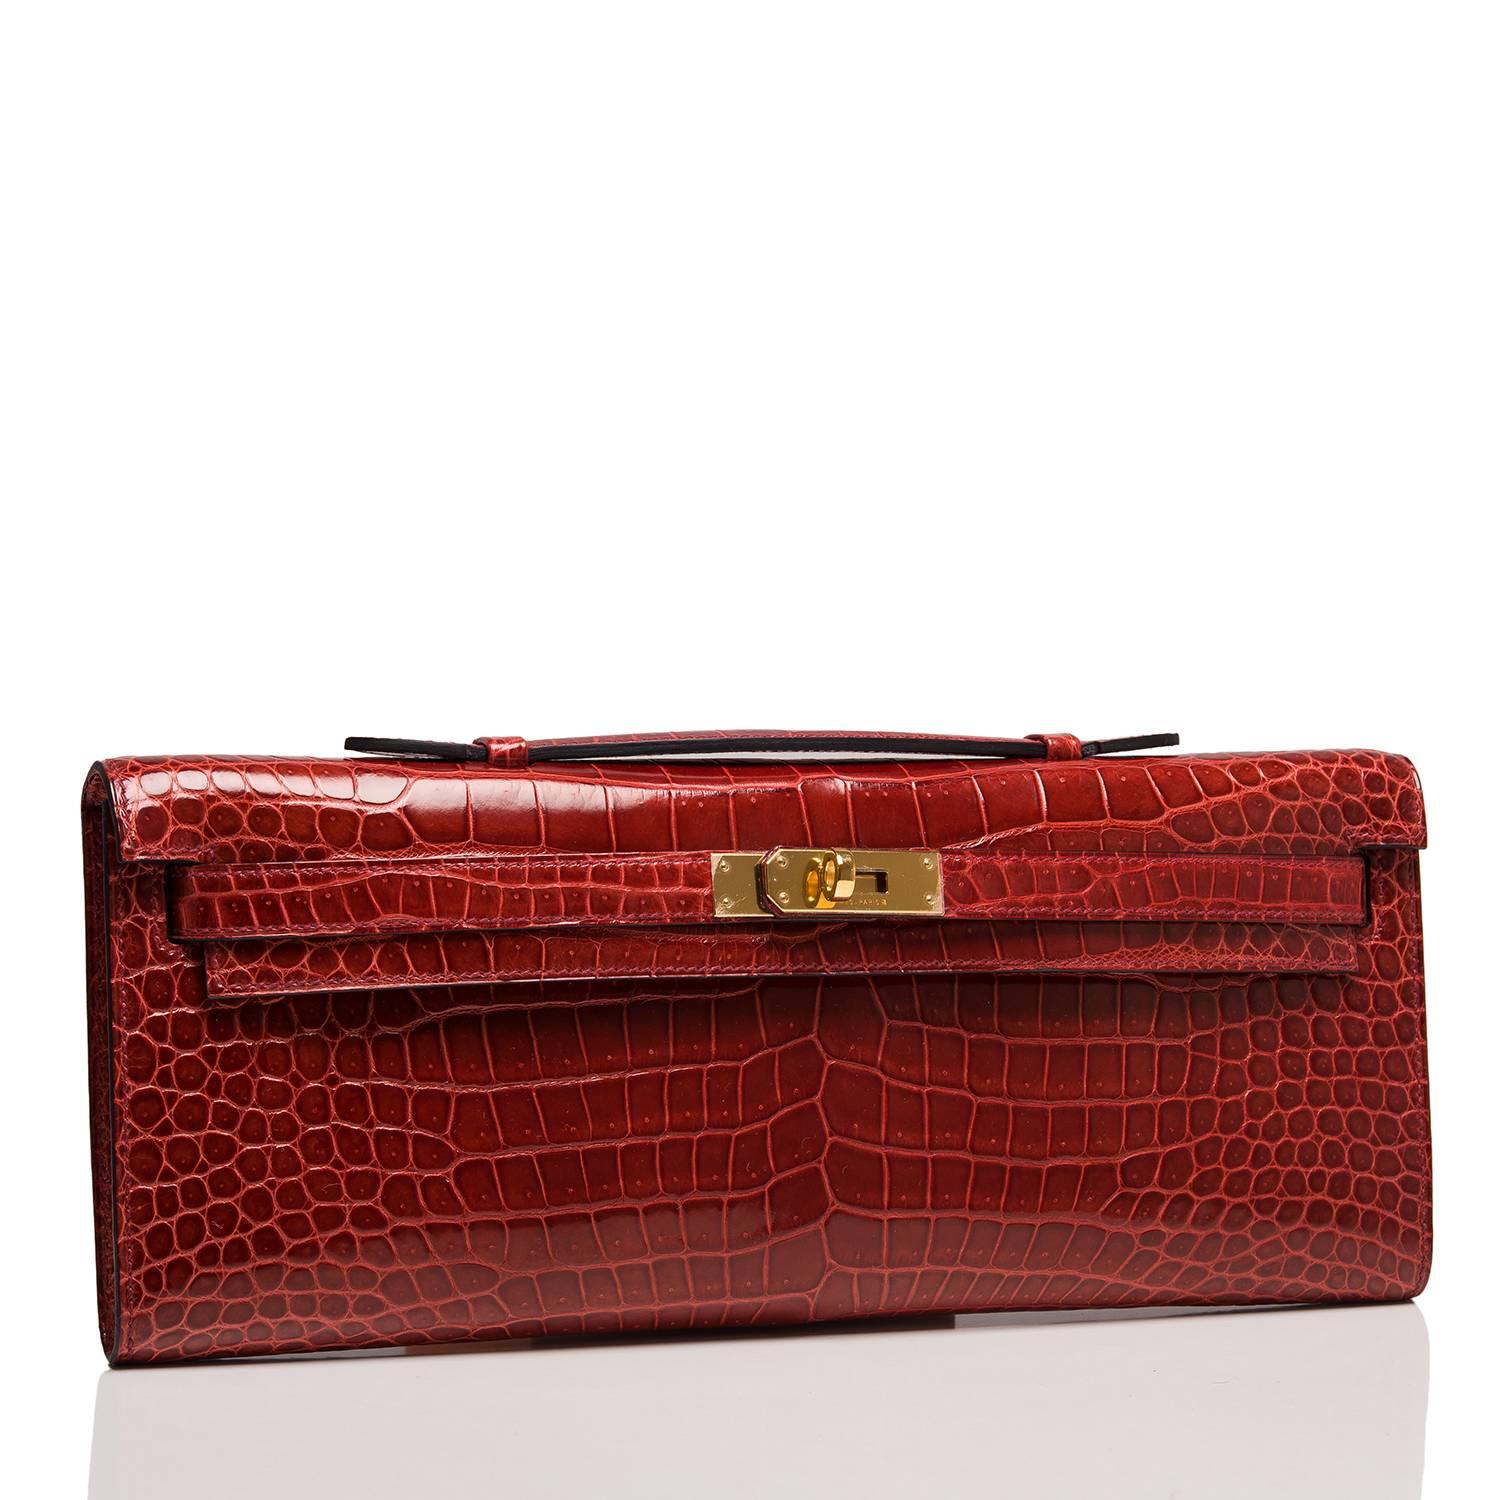  	
Hermes Rouge H Kelly Cut in shiny Porosus Crocodile with gold hardware.

This exotic Kelly Cut has tonal stitching, front straps with toggle closure and a top flat handle.

The interior is lined in Rouge H chèvre leather and features an